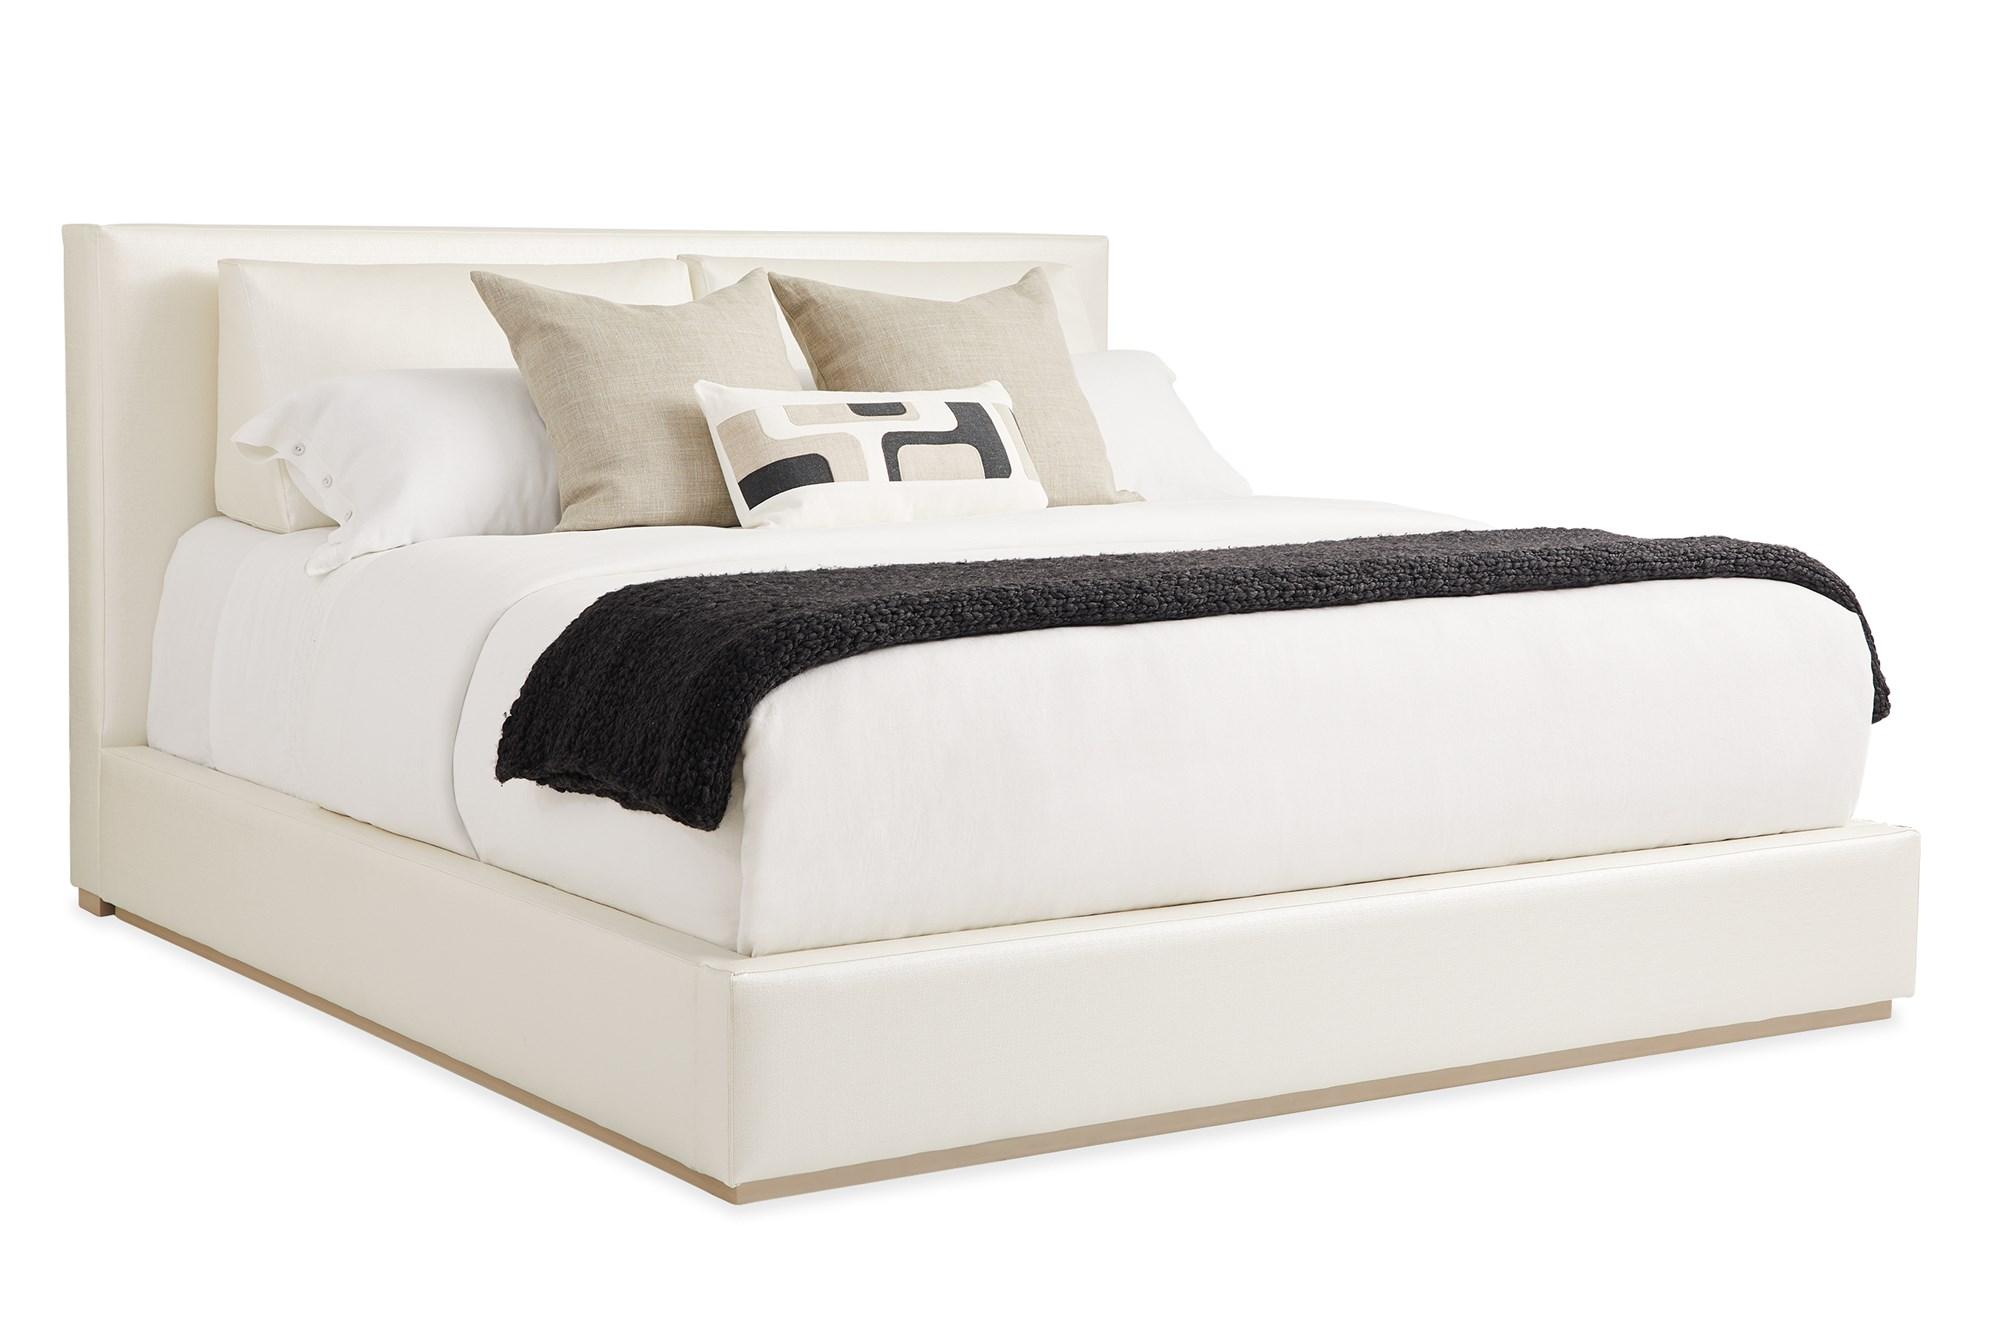 Contemporary Platform Bed THE BOUTIQUE BED SIG-419-125 in Cream Fabric